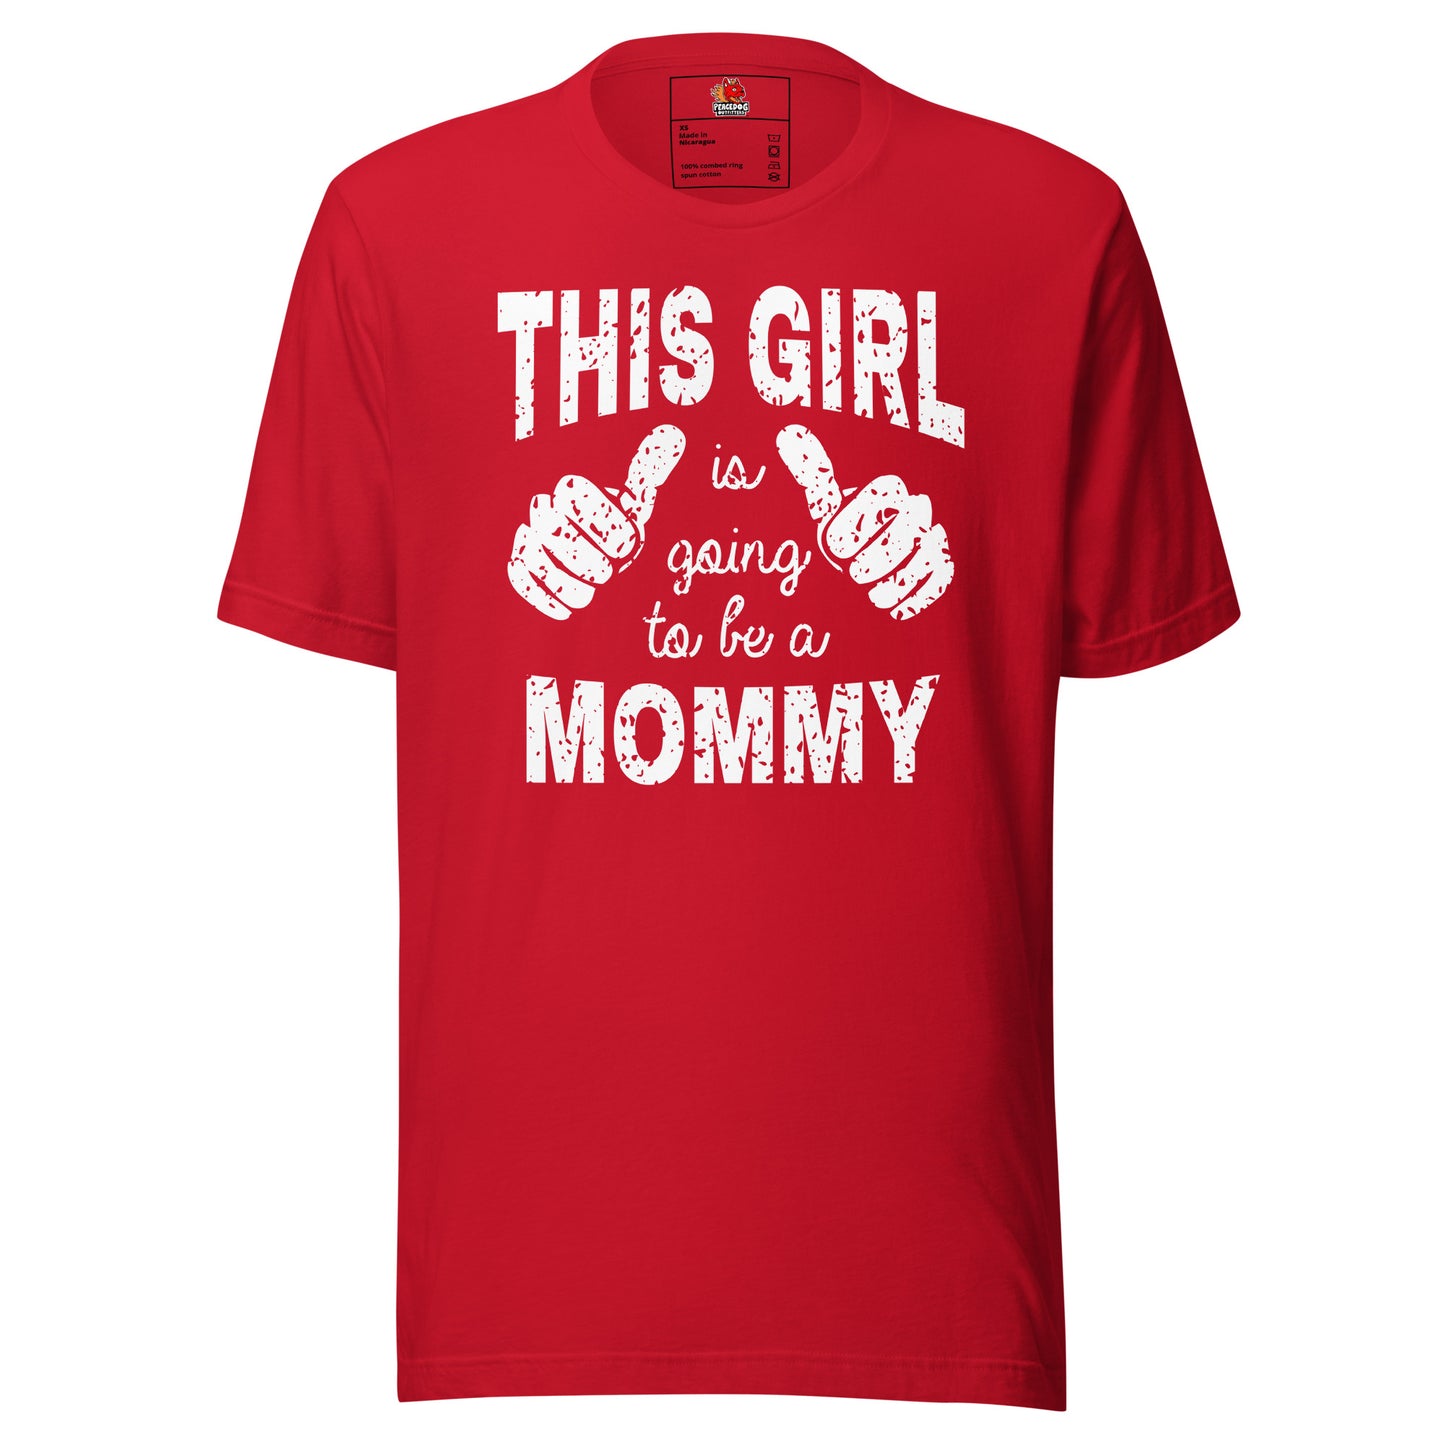 The Girl is Going to be a Mommy T-shirt